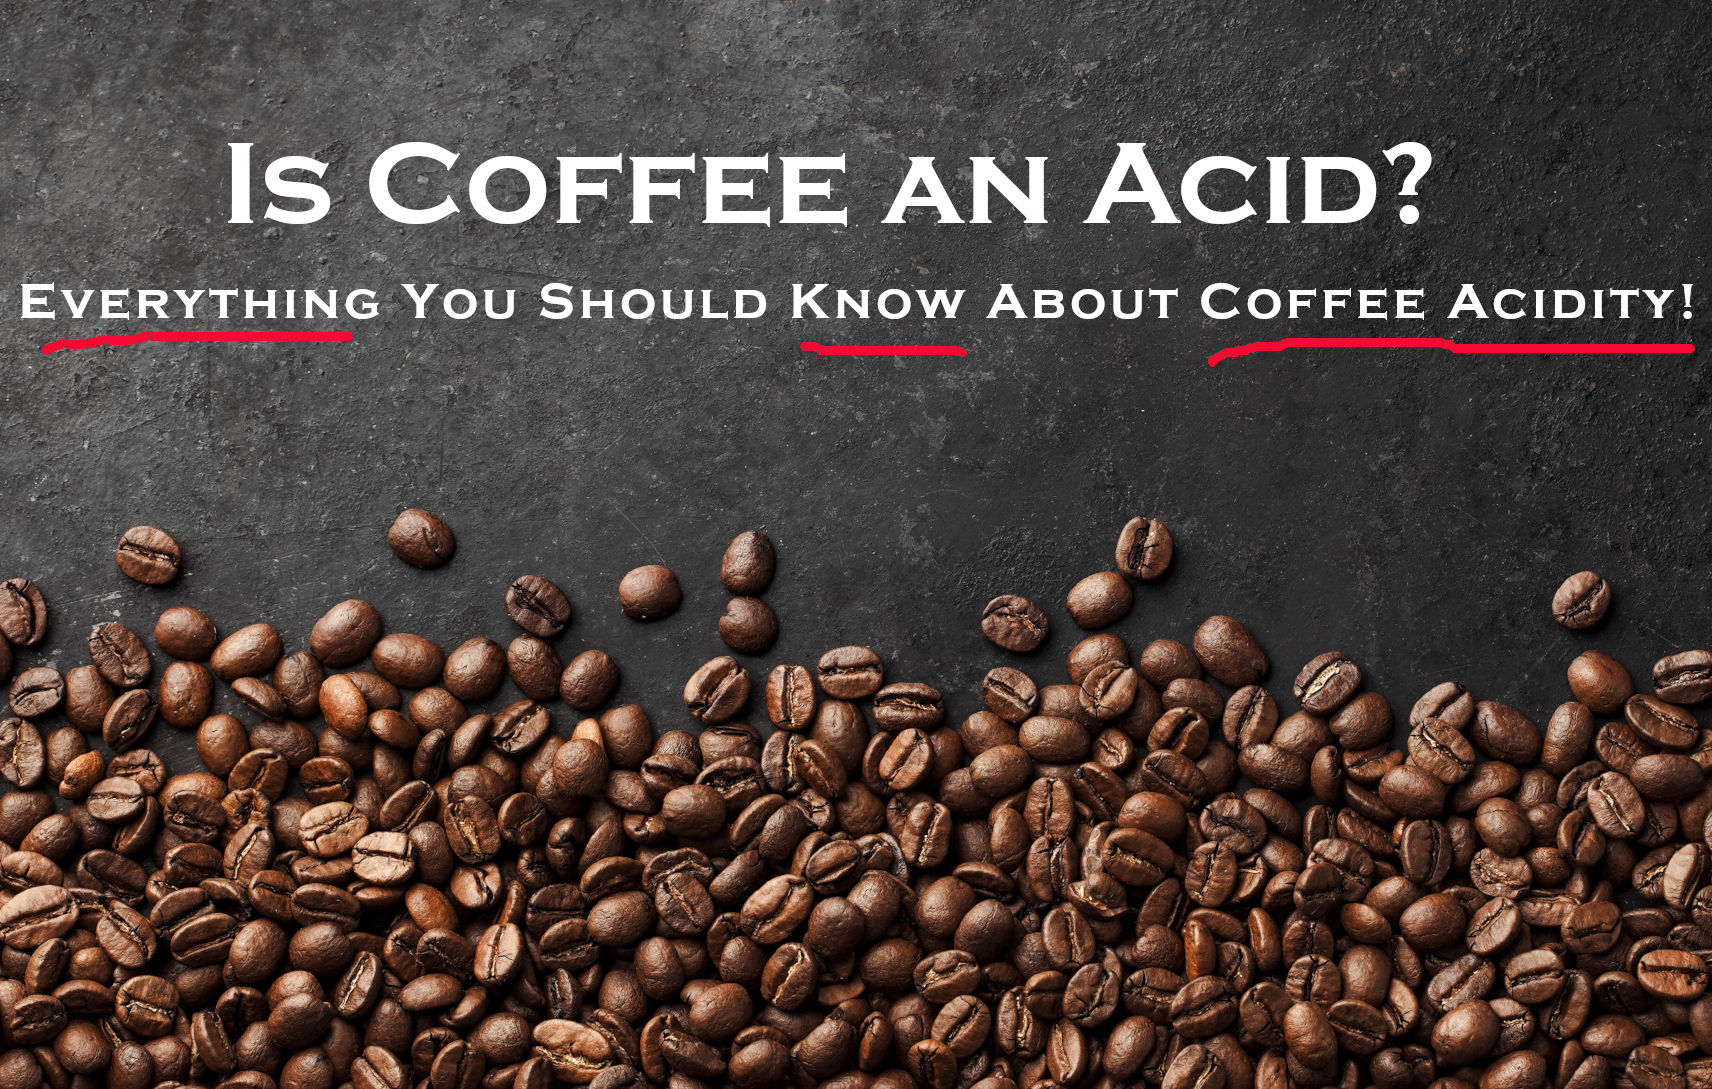 Is Coffee an Acid? Everything You Should Know About Coffee Acidity!